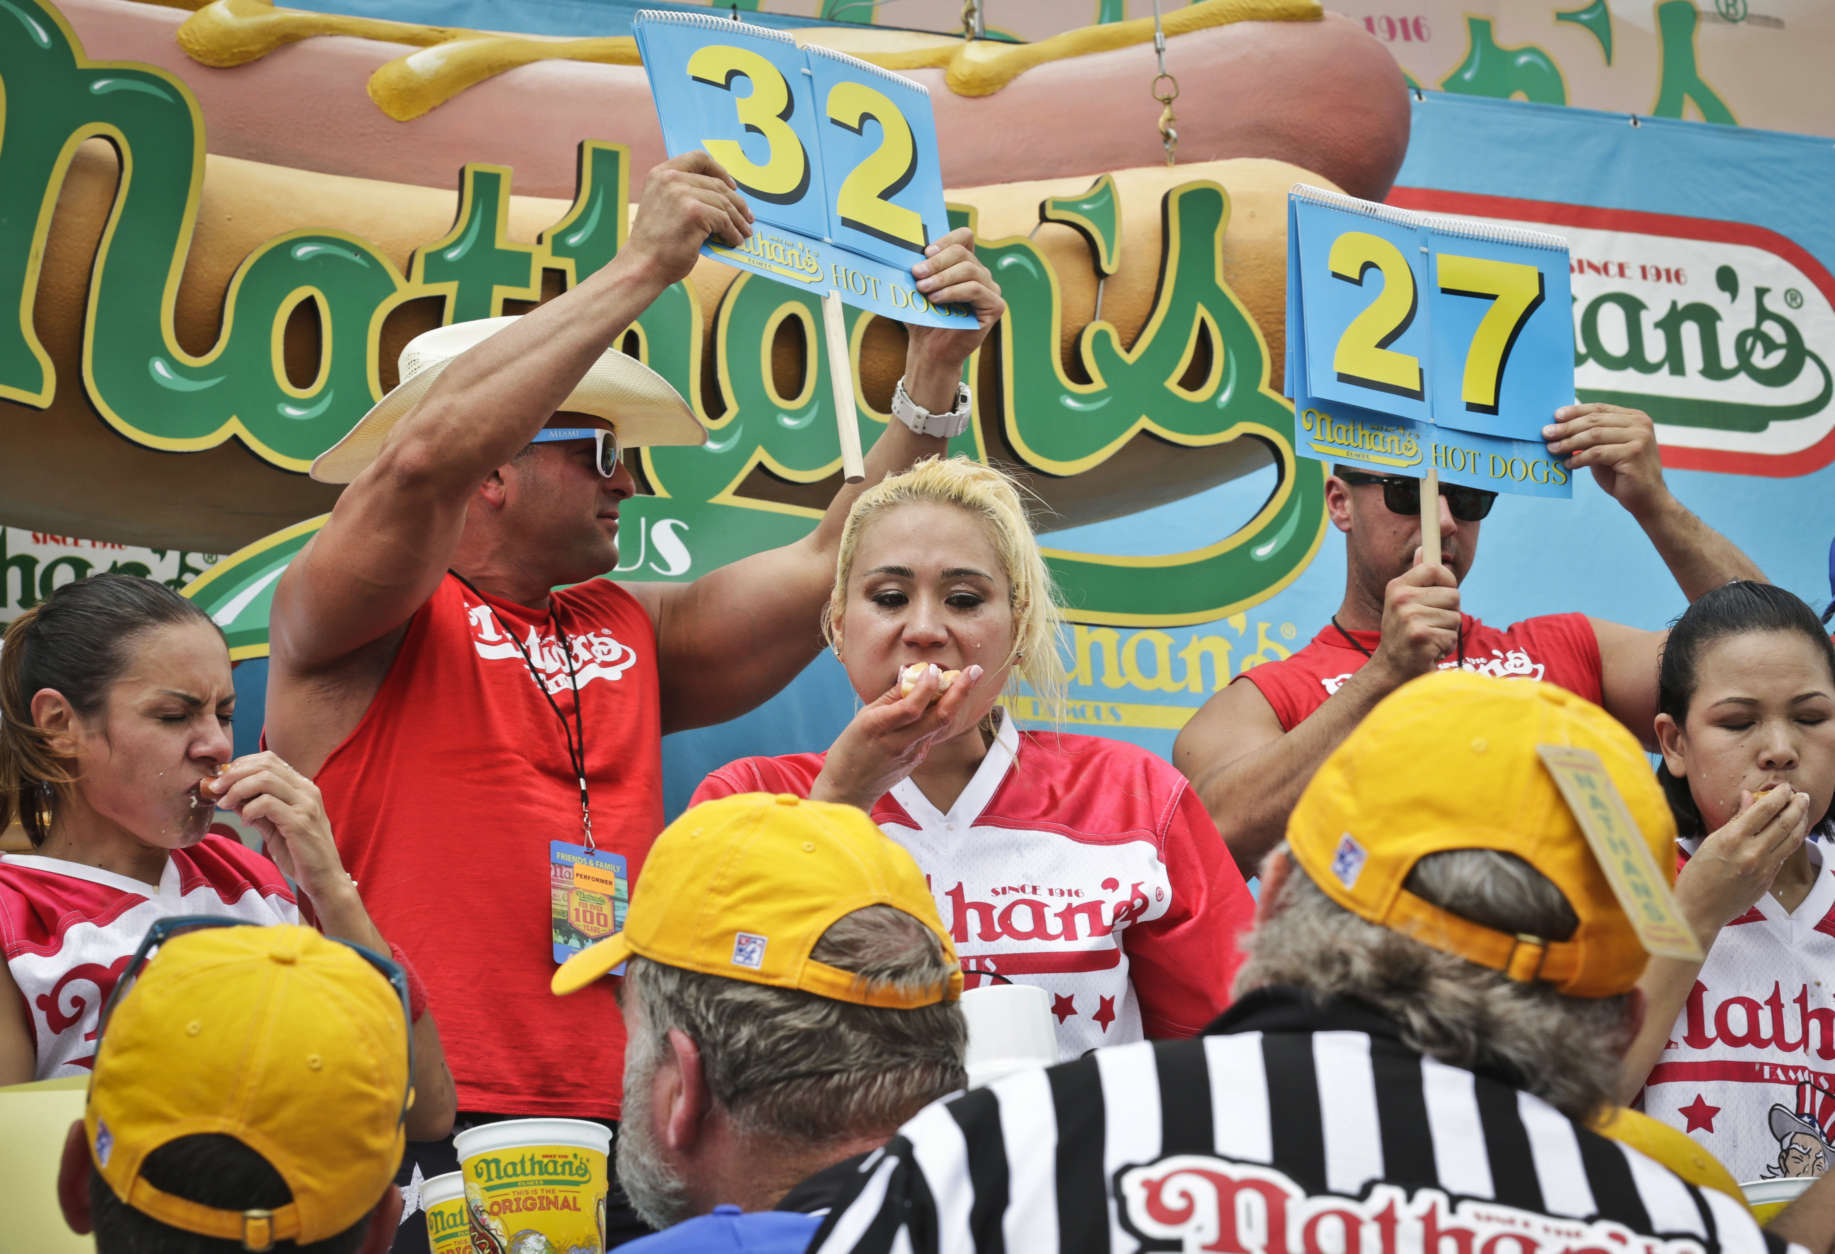 Miki Sudo, center, competes in the women's division of the Nathan's Famous Hot Dog Eating Contest on Tuesday, July 4, 2017, in New York. The Las Vegas woman ate 41 hot dogs and buns in 10 minutes to win her fourth straight title. (AP Photo/Bebeto Matthews)